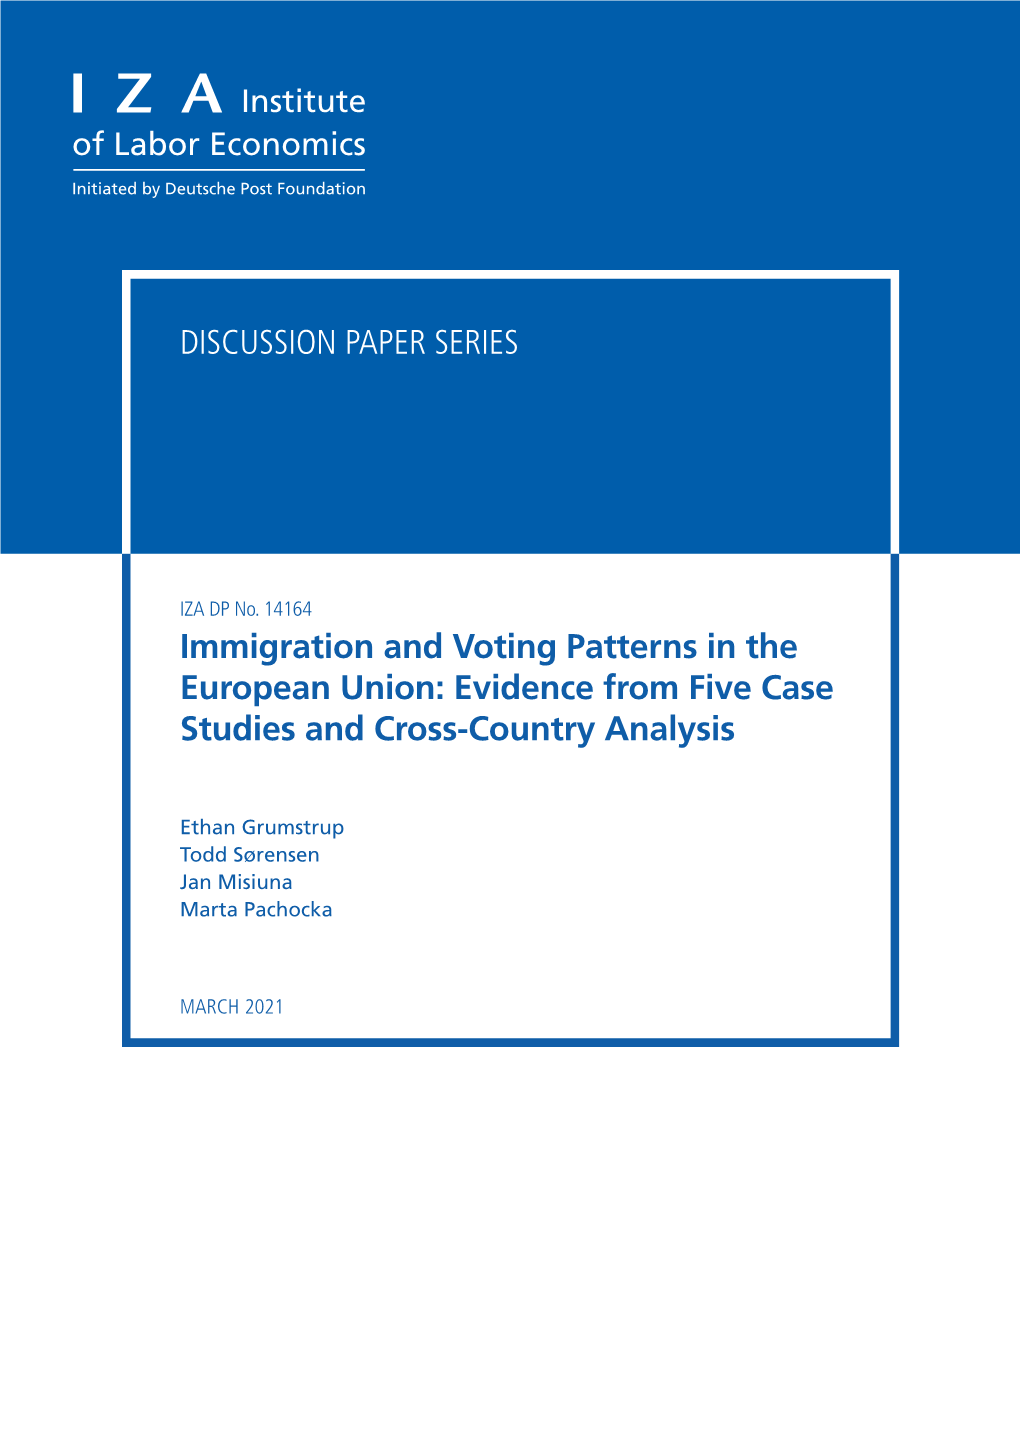 Immigration and Voting Patterns in the European Union: Evidence from Five Case Studies and Cross-Country Analysis